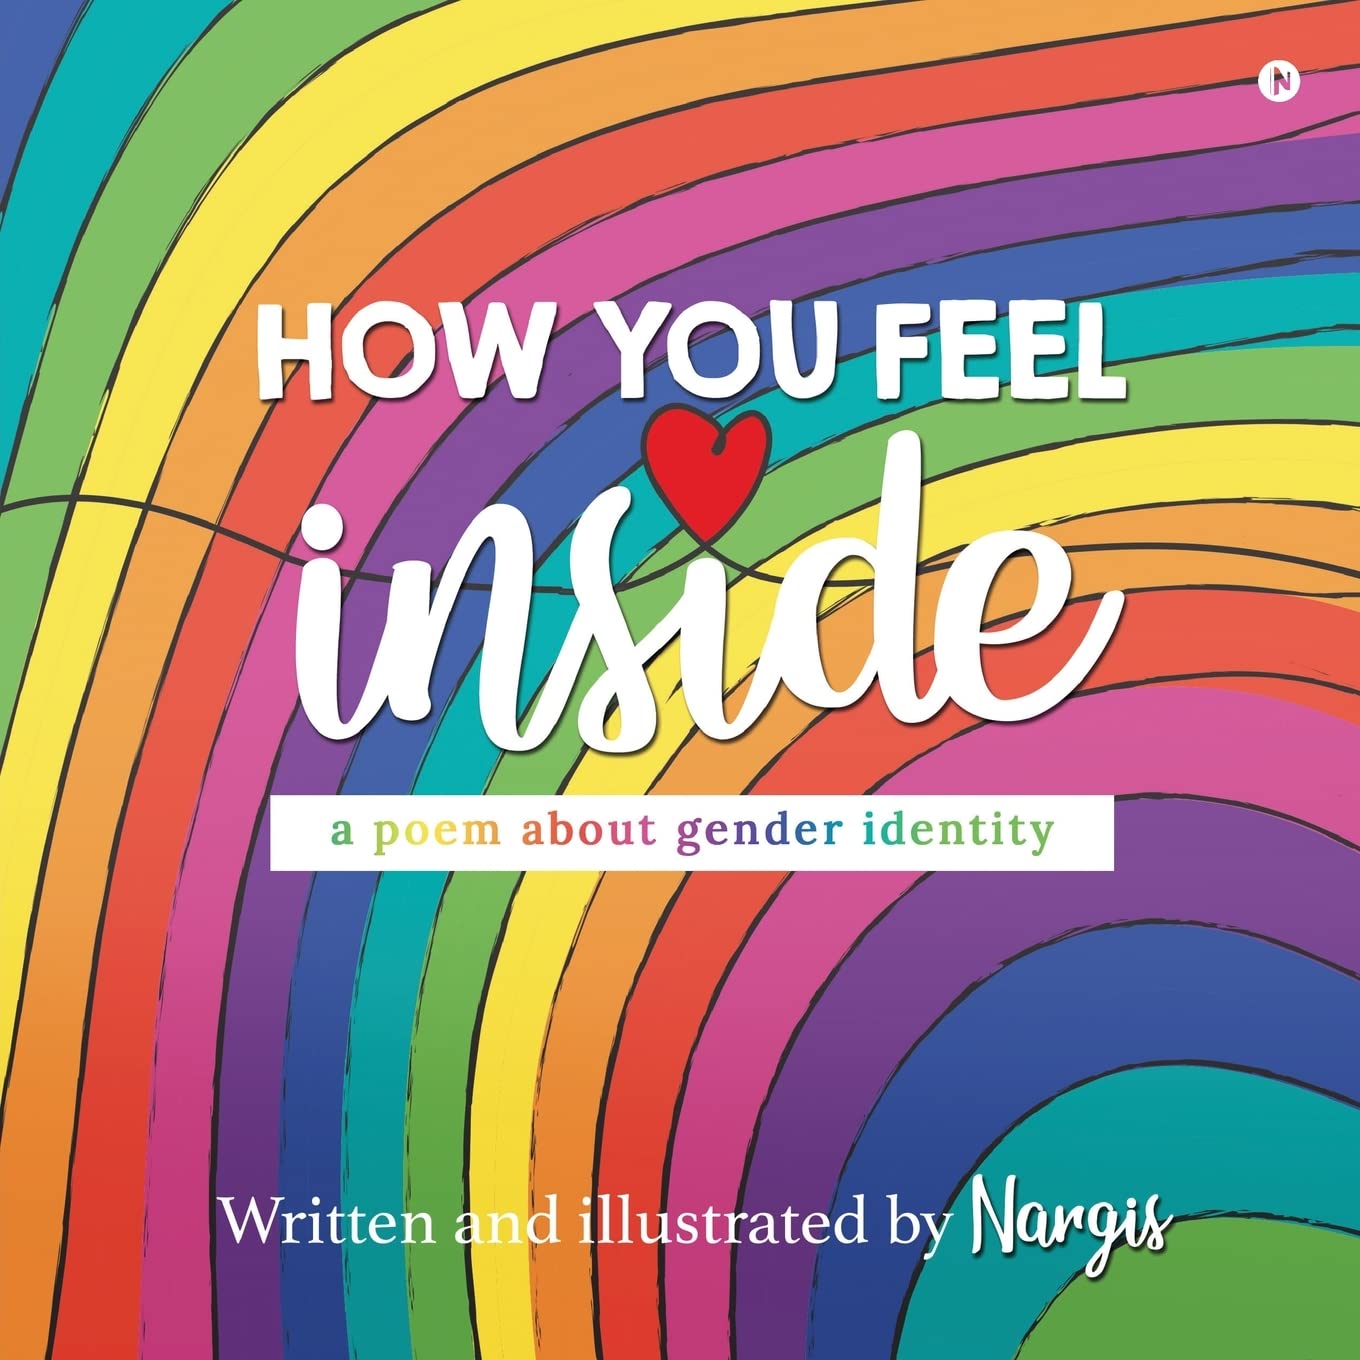 How You Feel Inside: A Poem About Gender Identity